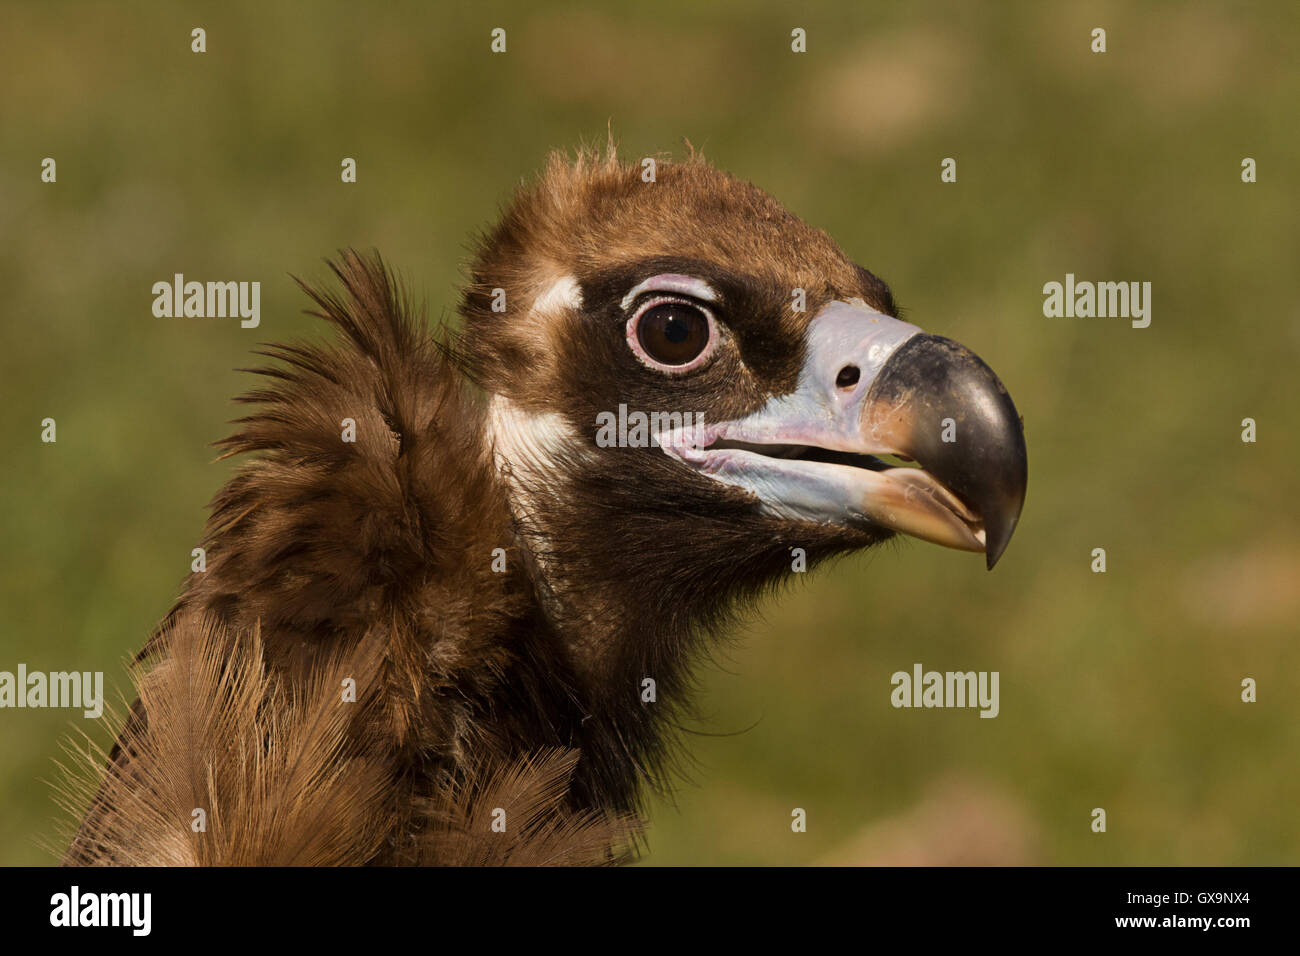 Portrait of a Cinereous Vulture (Aegypius monachus), the largest vulture species in Europe. Stock Photo